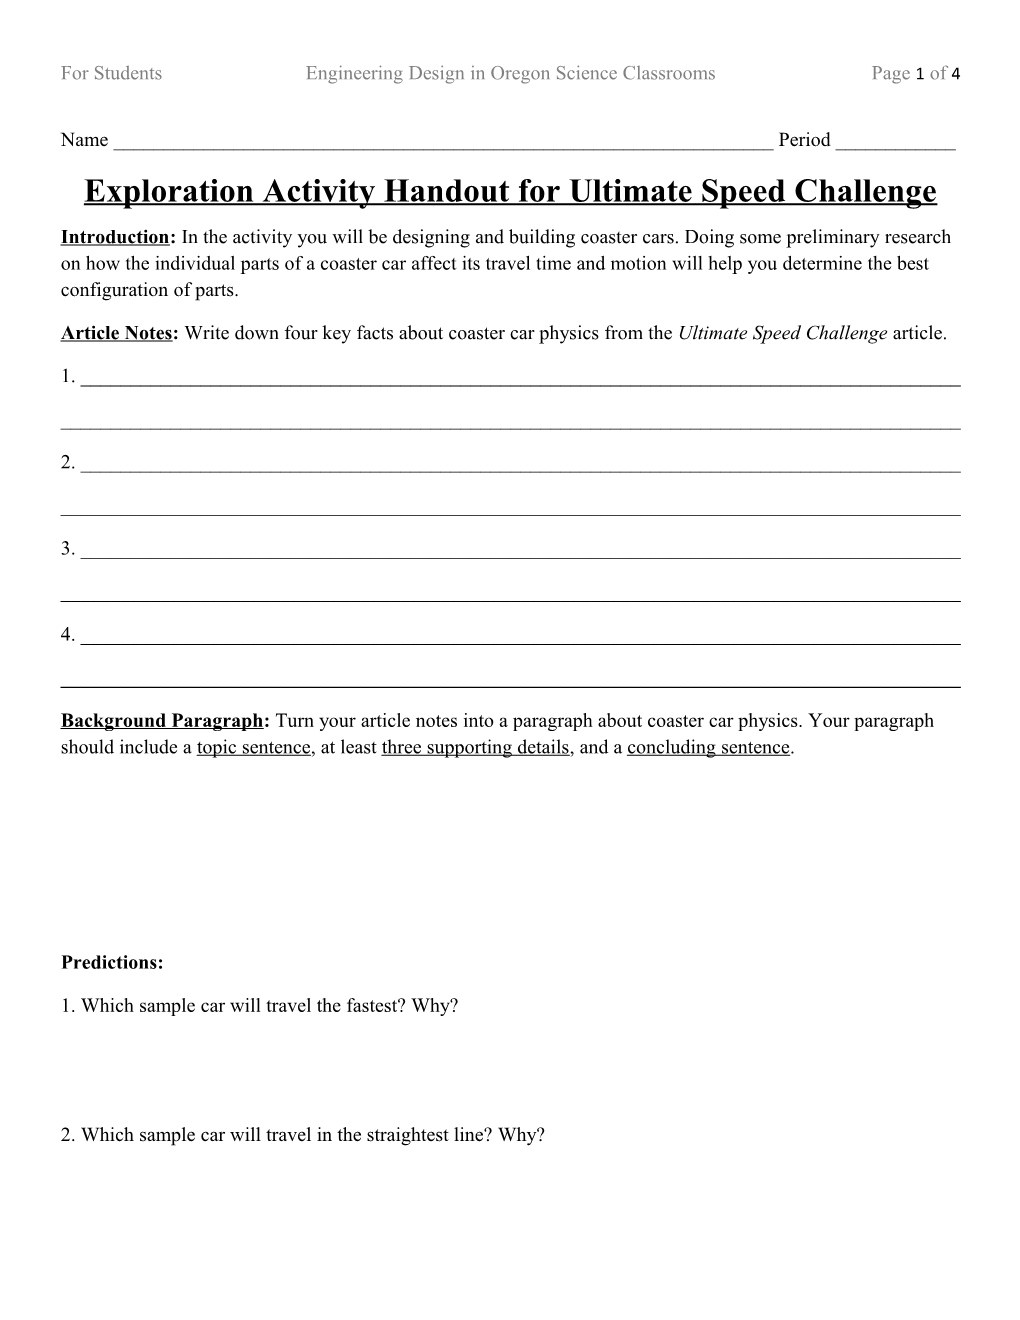 Exploration Activity Handout for Ultimate Speed Challenge